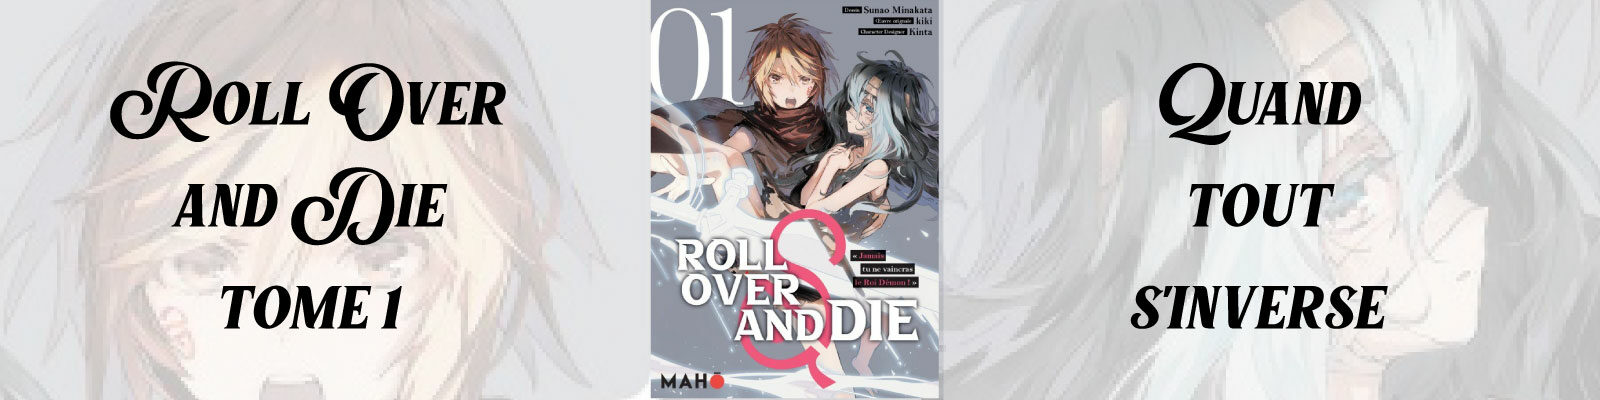 Roll Over and Die-T1-2